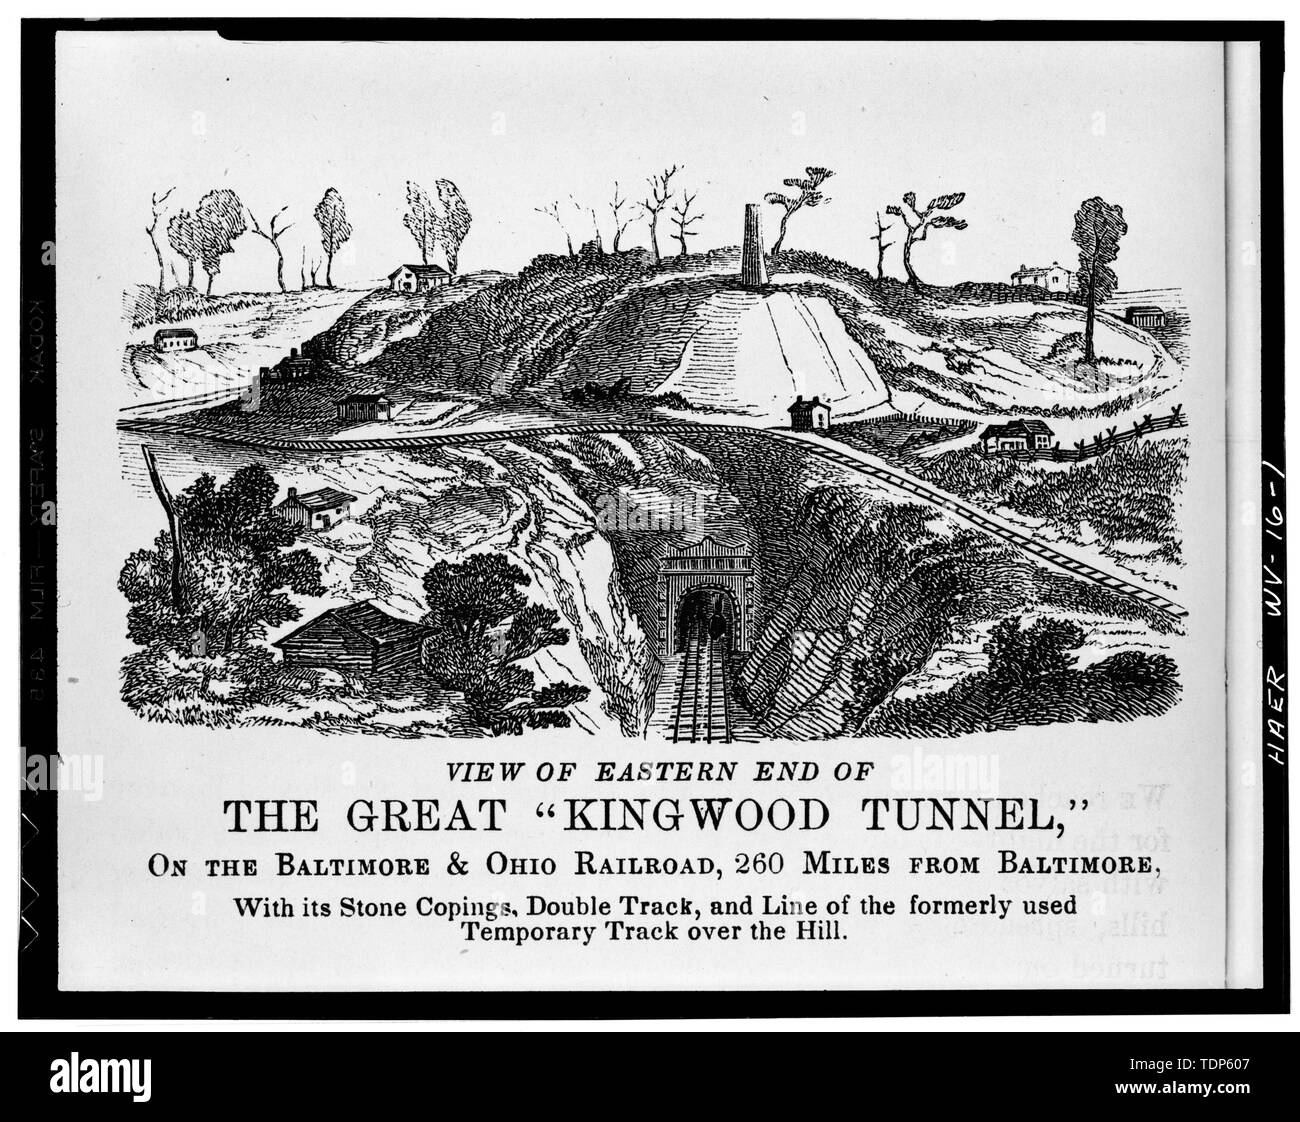 Photocopied 1974, The Book of the Great Railway Celebrations of 1857, William Prescott Smith, New York, D. Appleton and Co., 1857 DRAWING SHOWING THE EASTERN END OF THE KINGWOOD TUNNEL. - Baltimore and Ohio Railroad, Kingwood Tunnel, Tunnelton, Preston County, WV; Fink, Albert; LaTrobe, Benjamin H Stock Photo